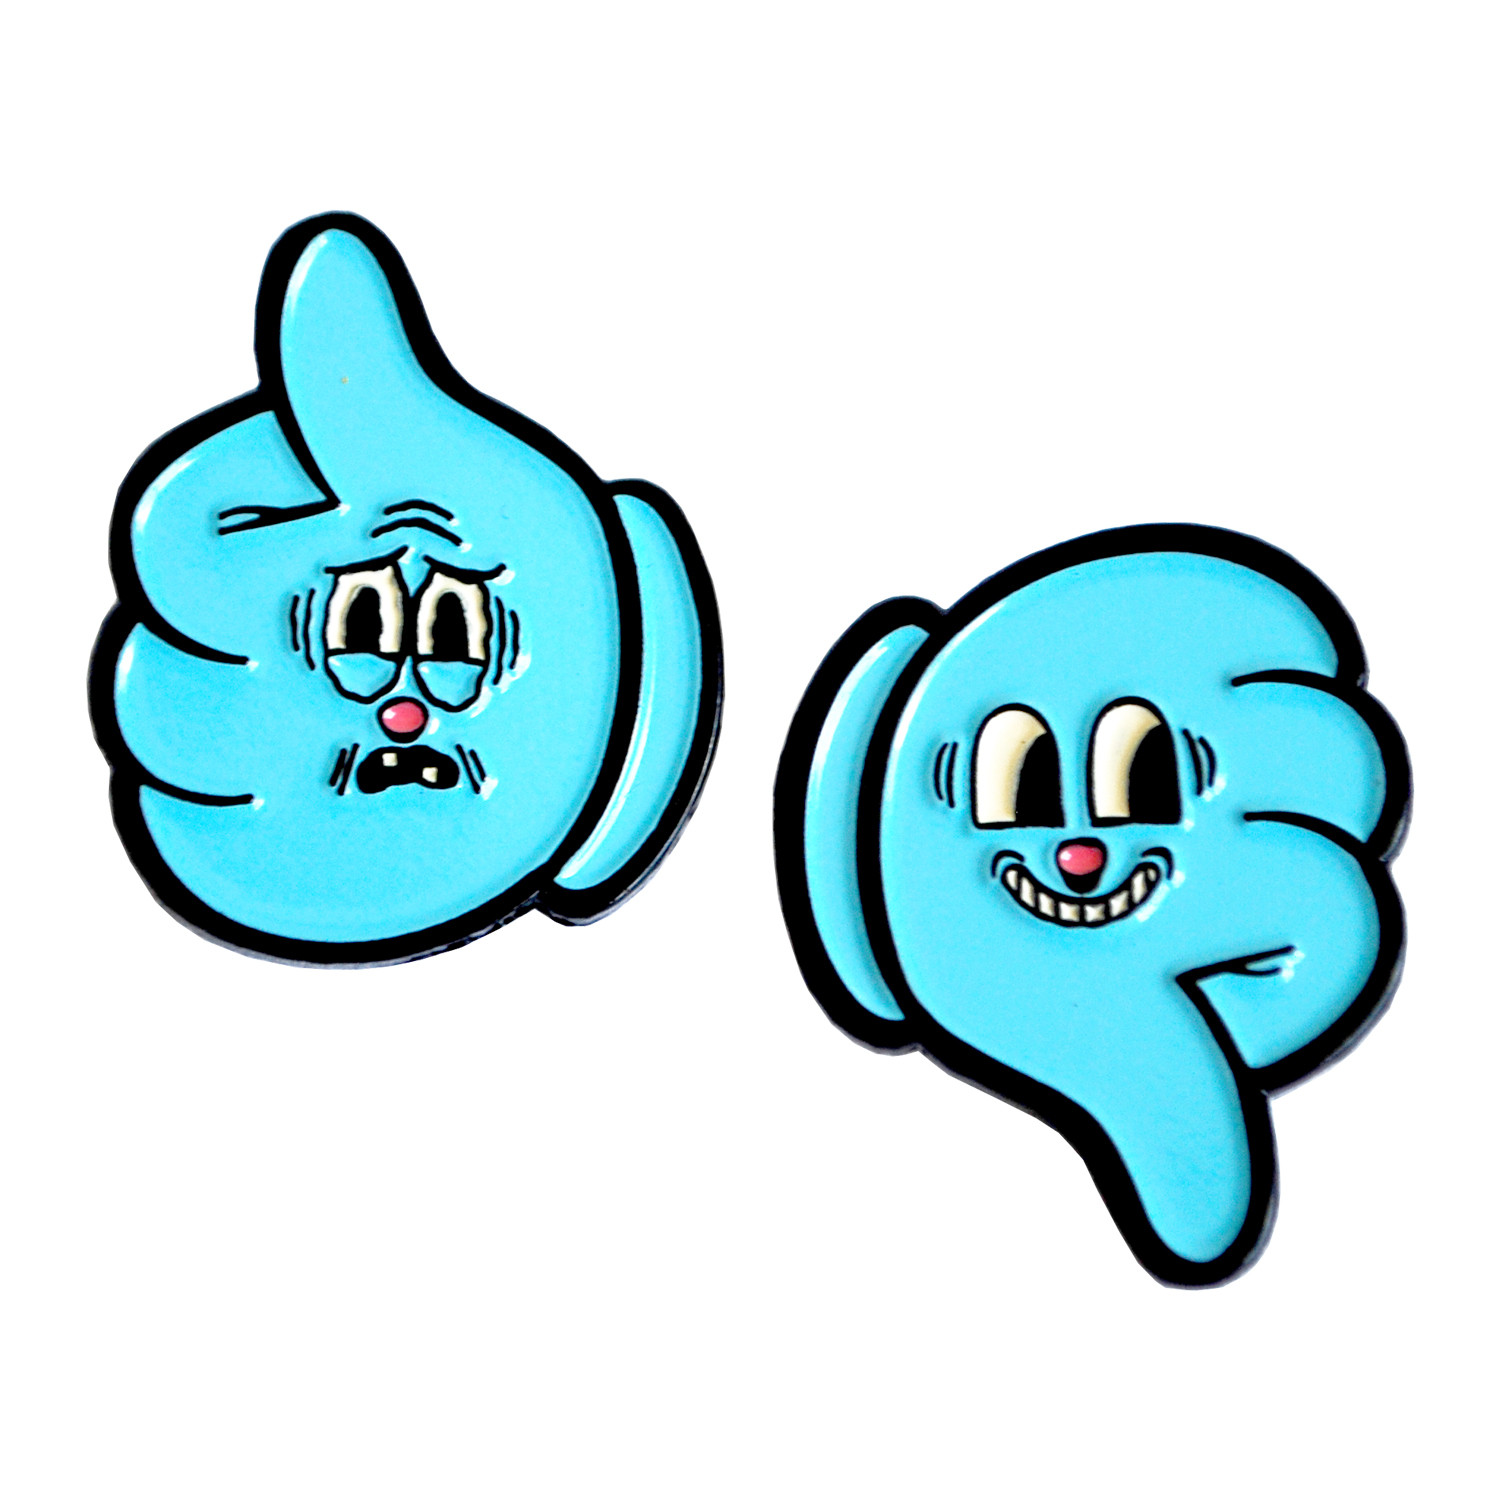 Thumbs Up / Thumbs Down Pin Pack - Valley Cruise Press